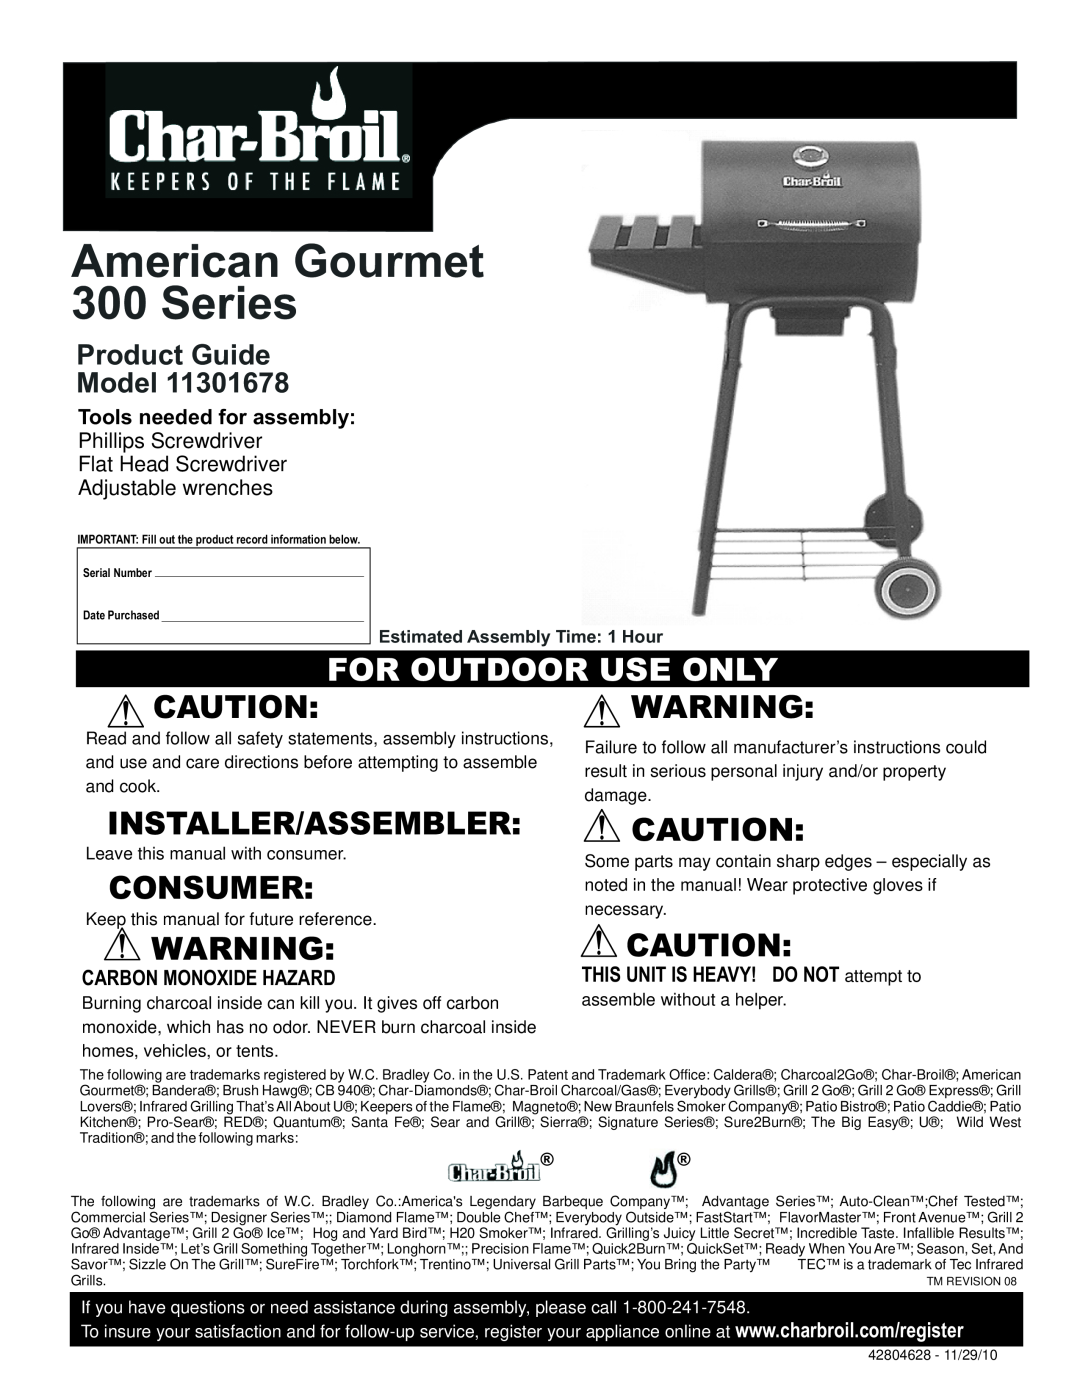 Char-Broil 11301678 manual Tools needed for assembly, Carbon Monoxide Hazard, THIS UNIT IS HEAVY! DO NOT attempt to 